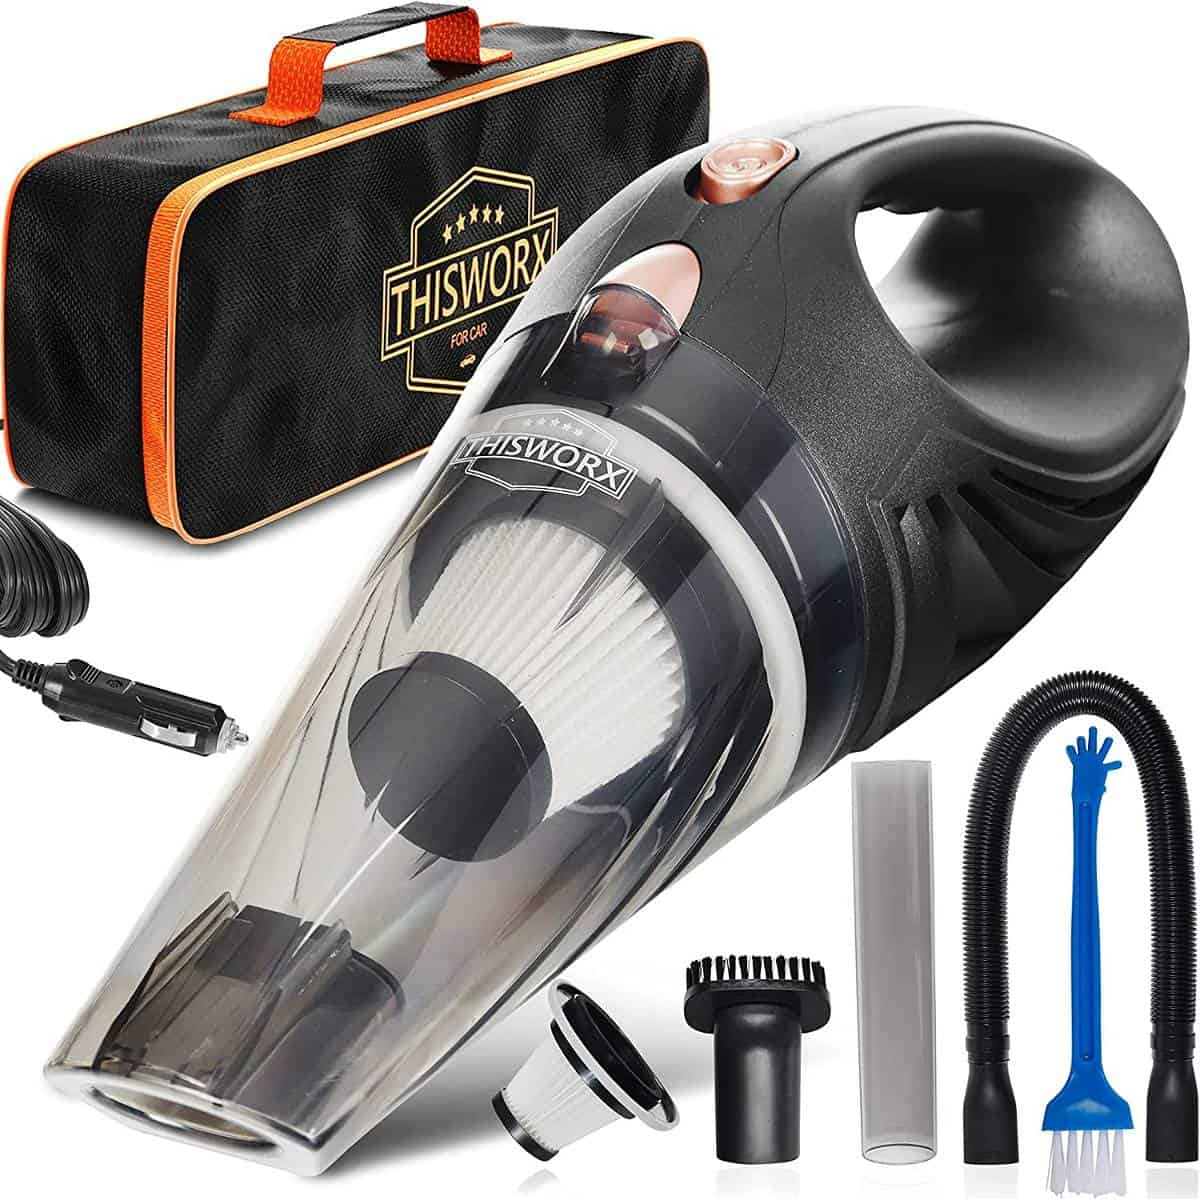 This car vacuum cleaner makes a great van life gift with its compact size and convenient storage bag.